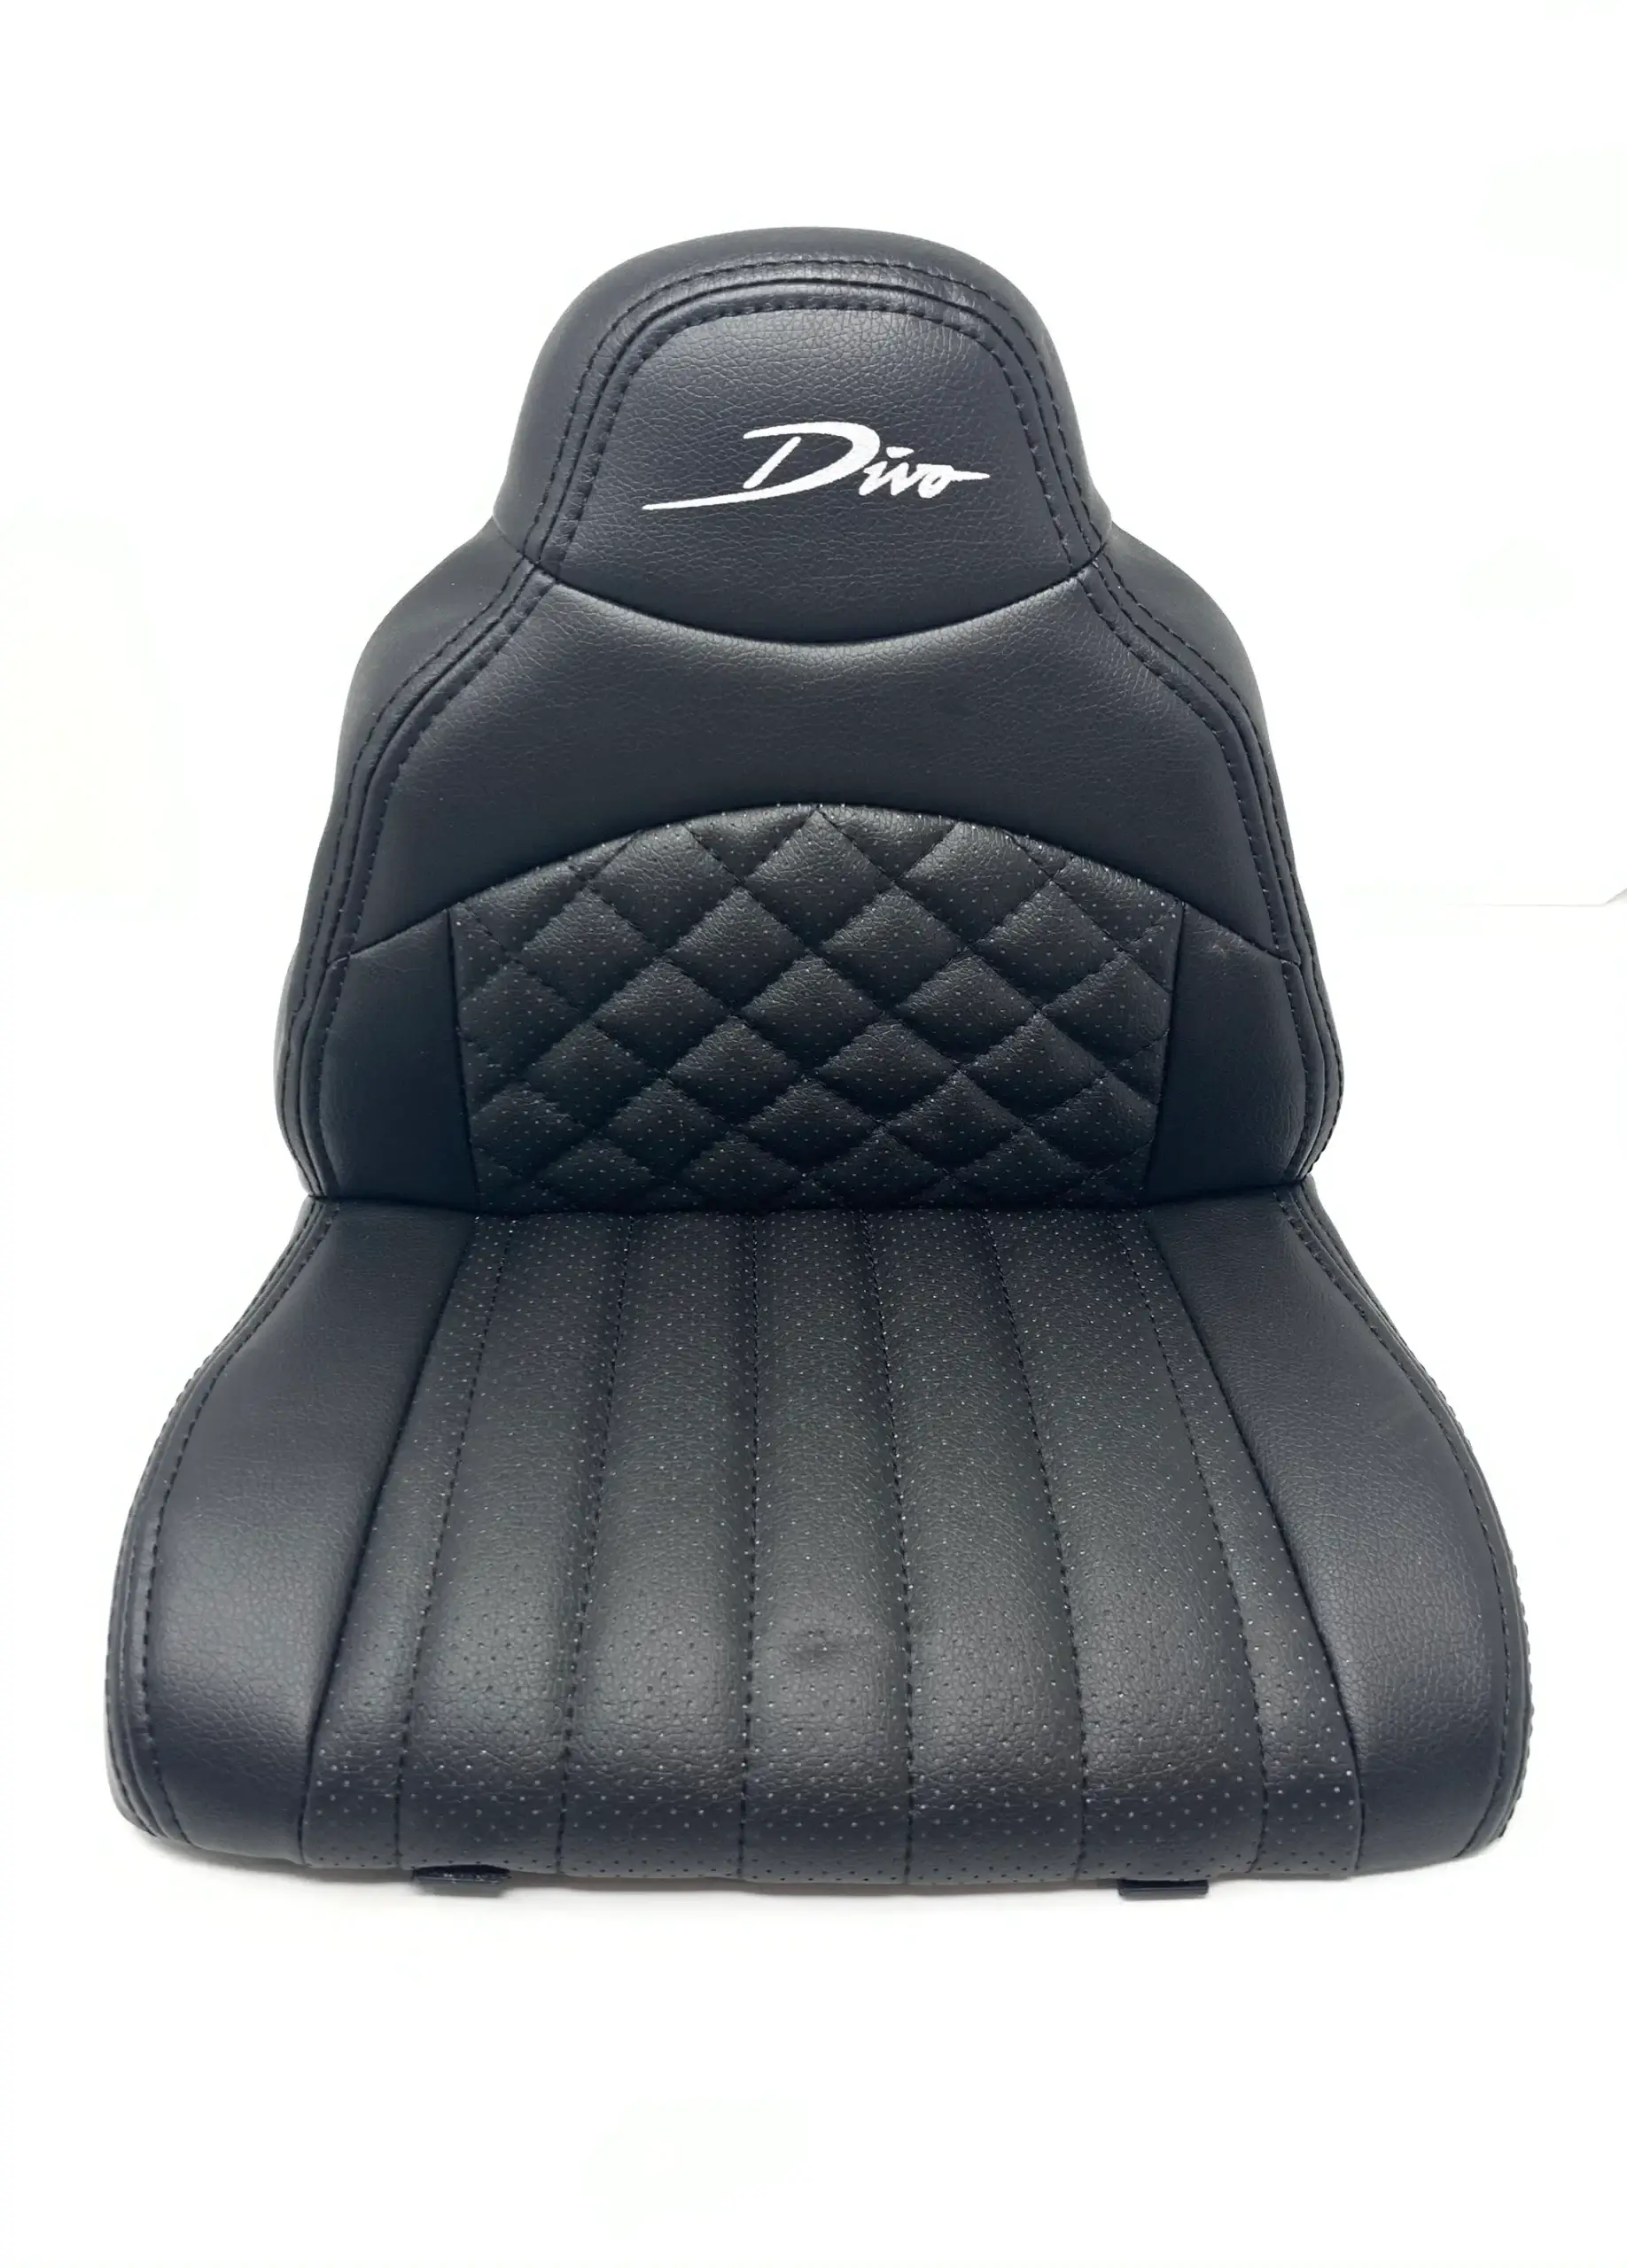 Eco Leather Seat for 12v Bugatti Divo: Sustainable Luxury Upgrade for Ultimate Comfort